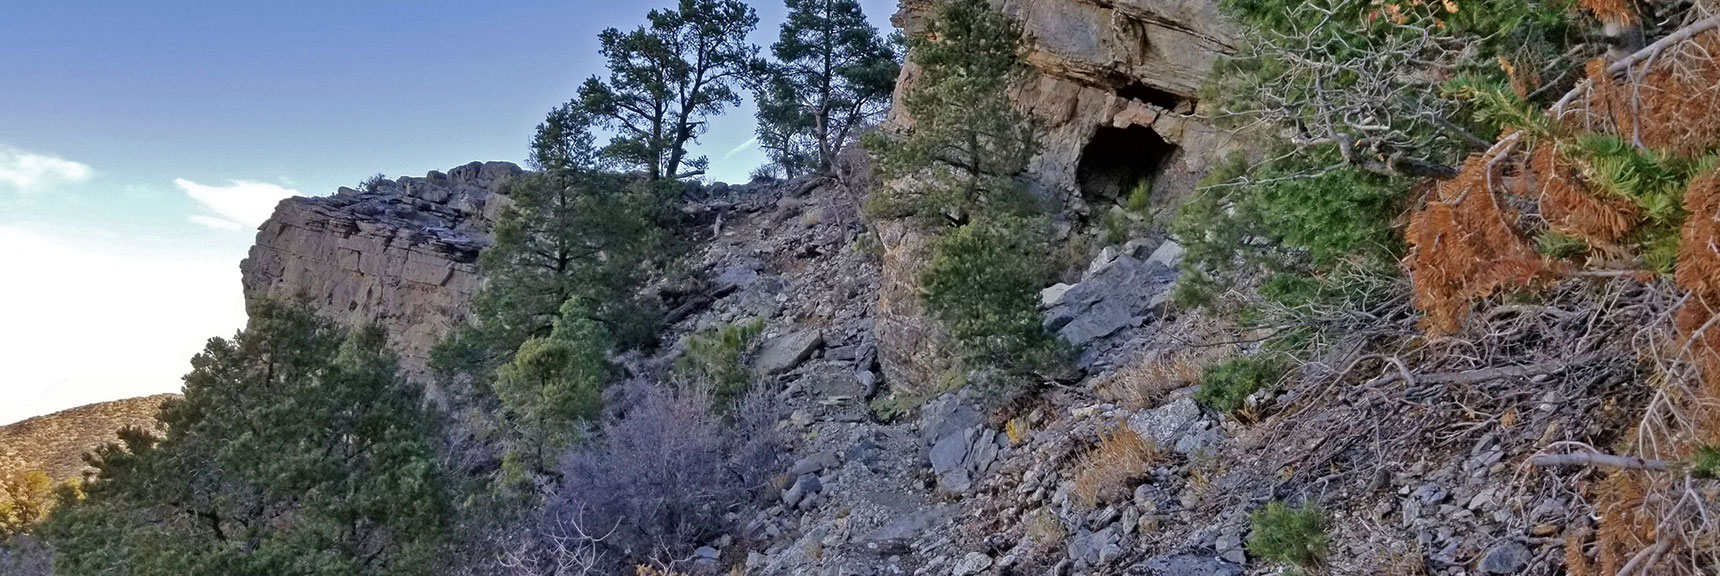 Trail Skirts Cliff Edge, At Times Narrowing, But Remaining Stable. Beautiful Nature Scenes. | Potosi Mountain Northern Cliffs Trail | Spring Mountains, Nevada